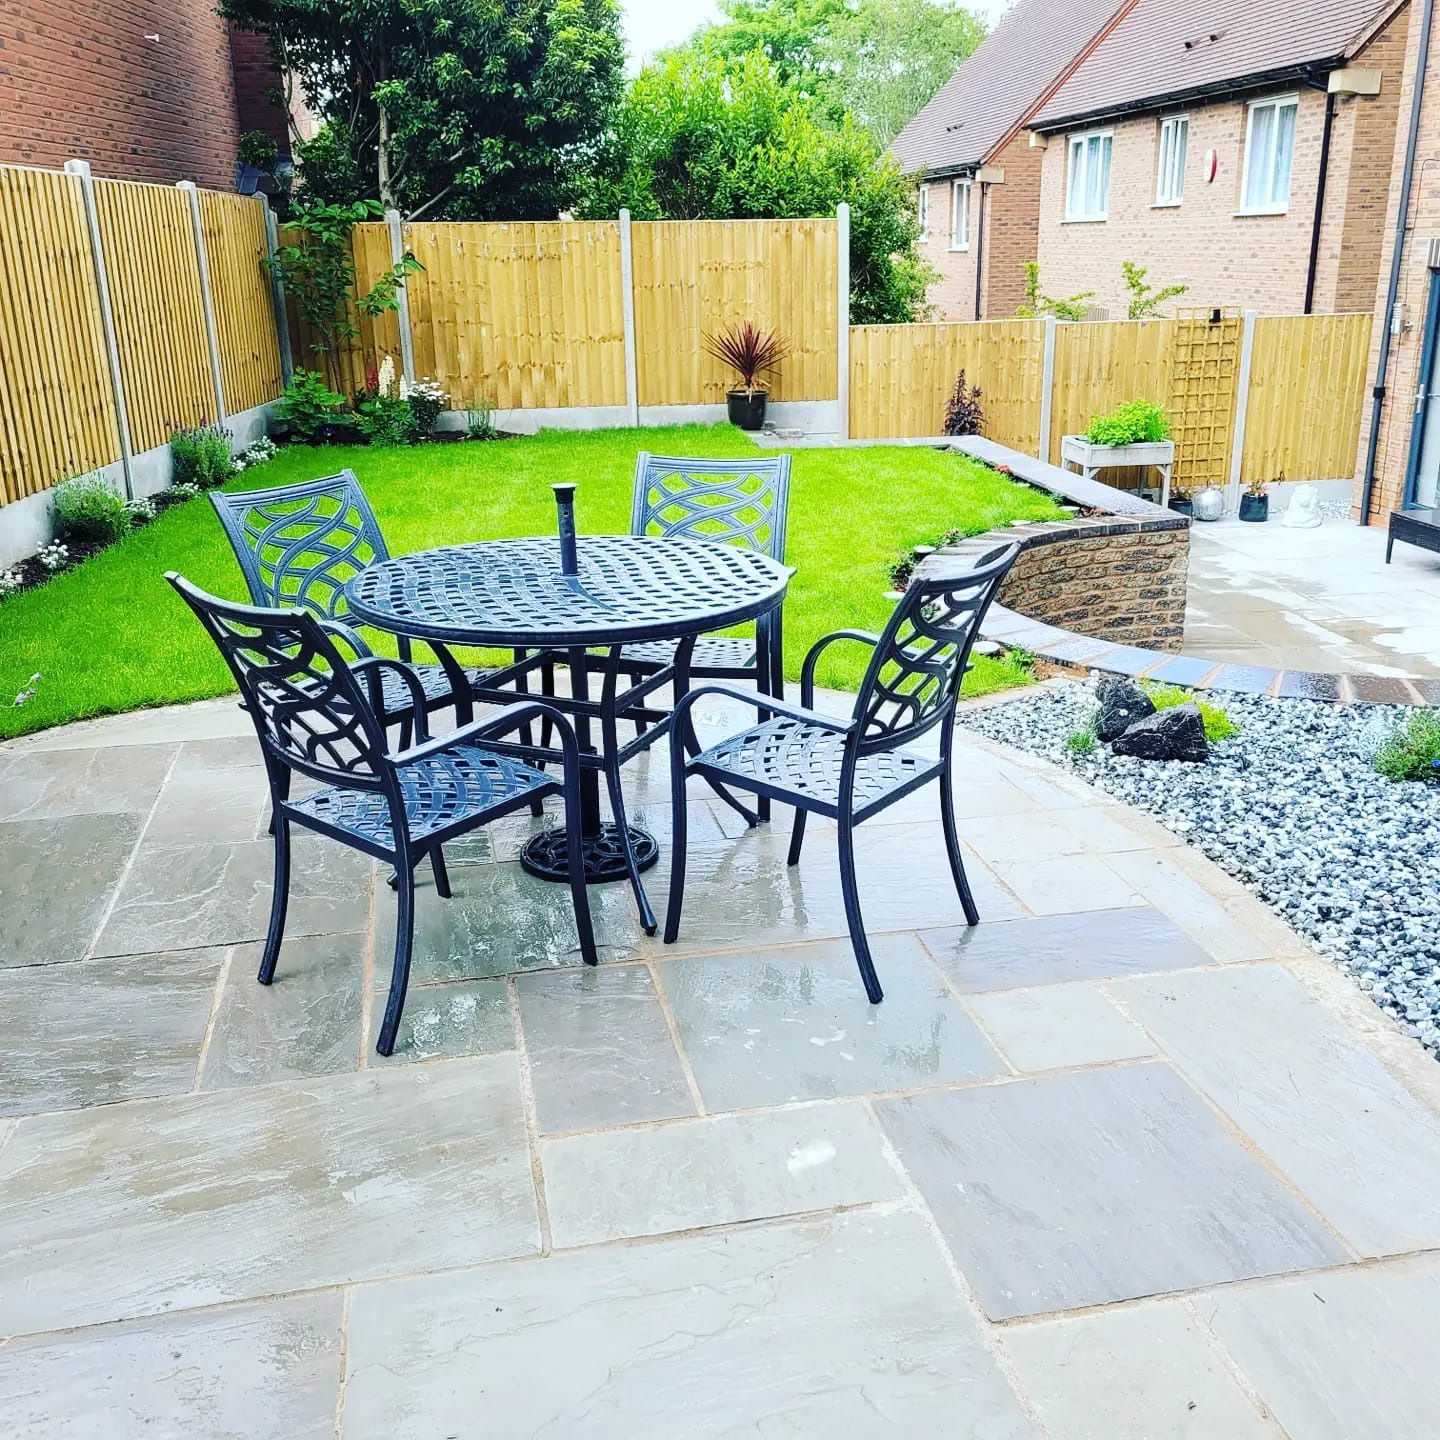 DNA Landscapes Nuneaton landscaping project